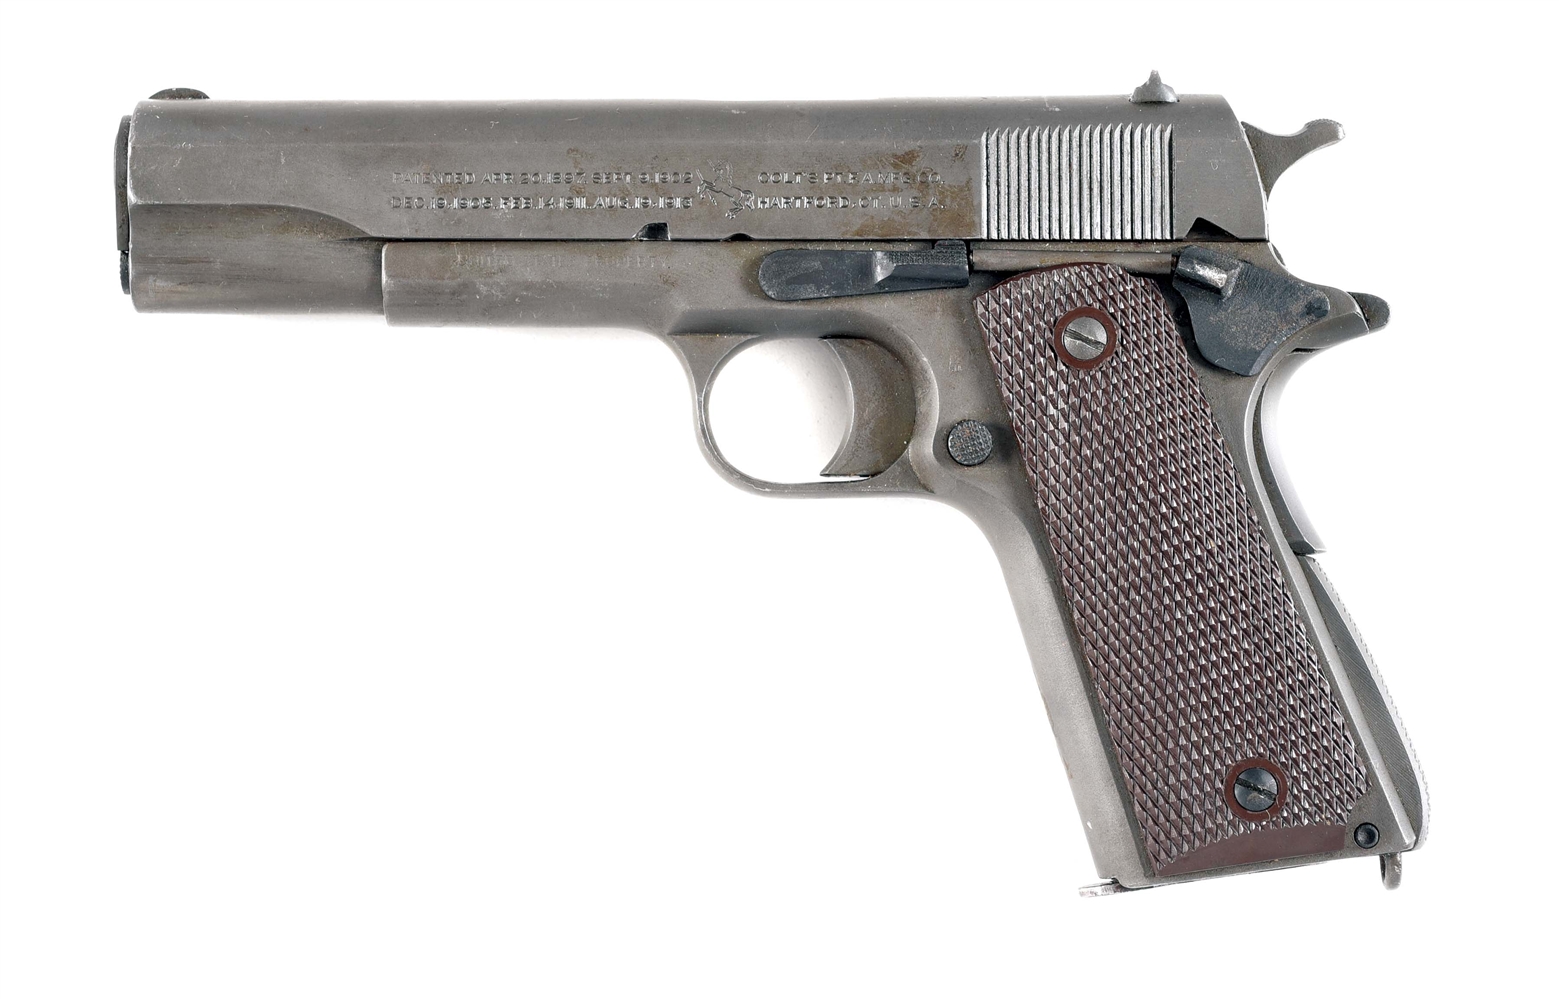 (C) COLT MODEL 1911 SEMI-AUTOMATIC PISTOL WITH BOX AND DCM SALES RECEIPT FROM 1960.